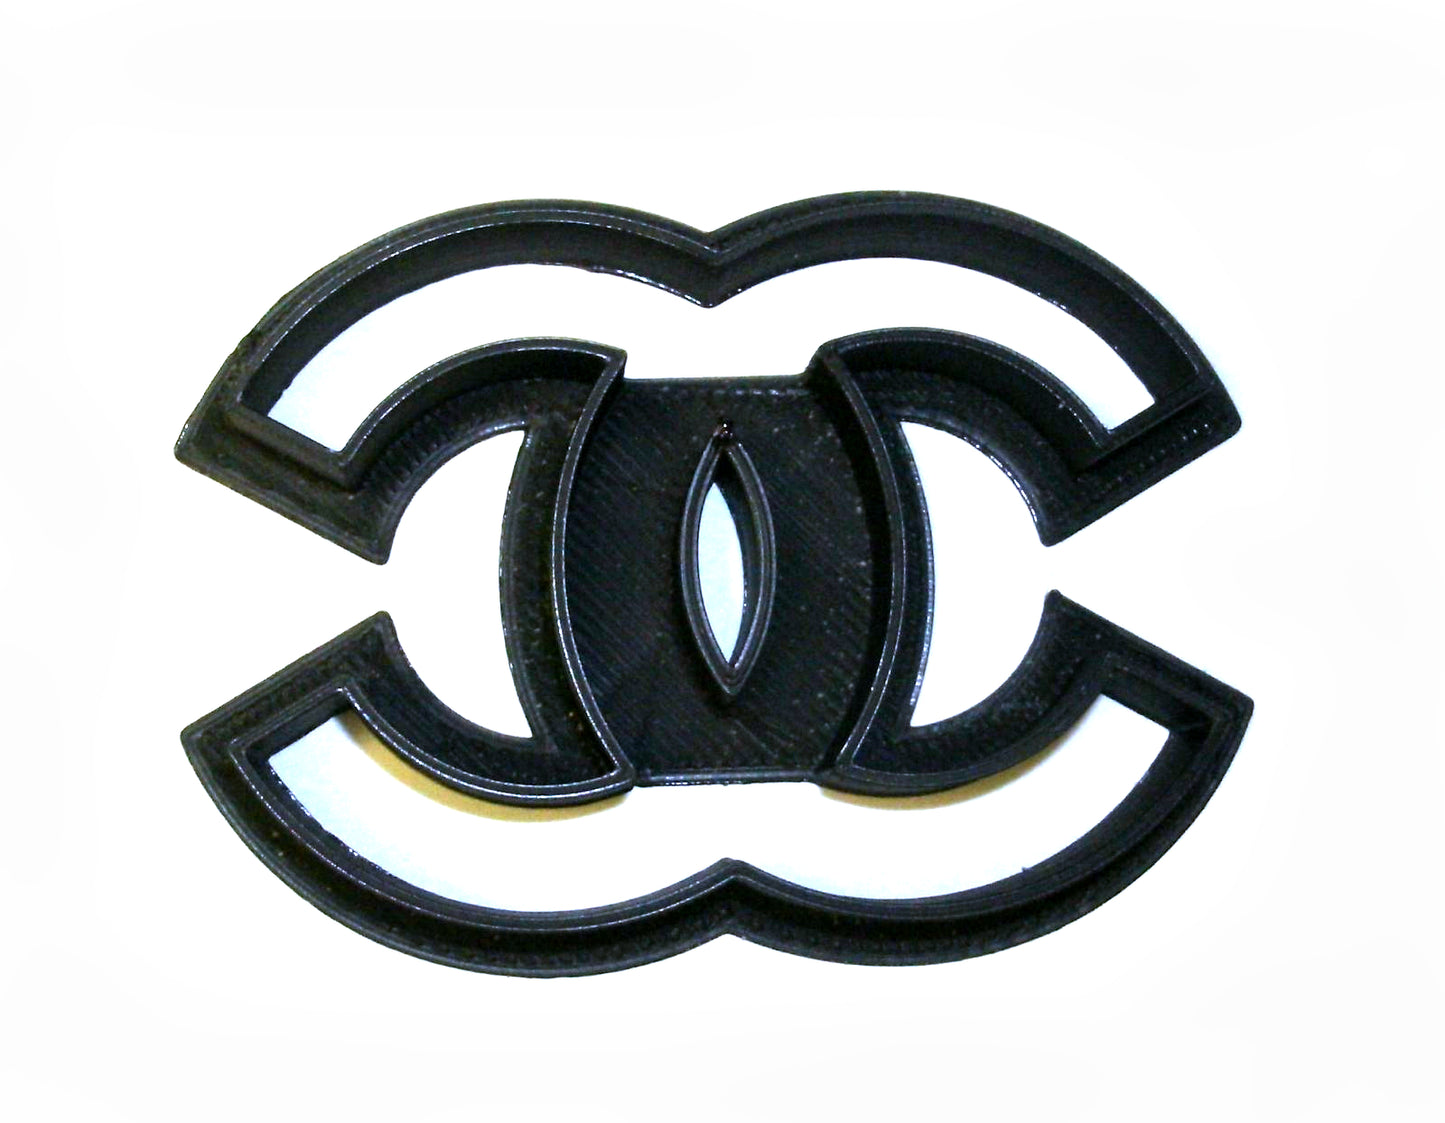 Coco Chanel Luxury Fashion Couture Brand Cookie Cutter Made in USA PR843